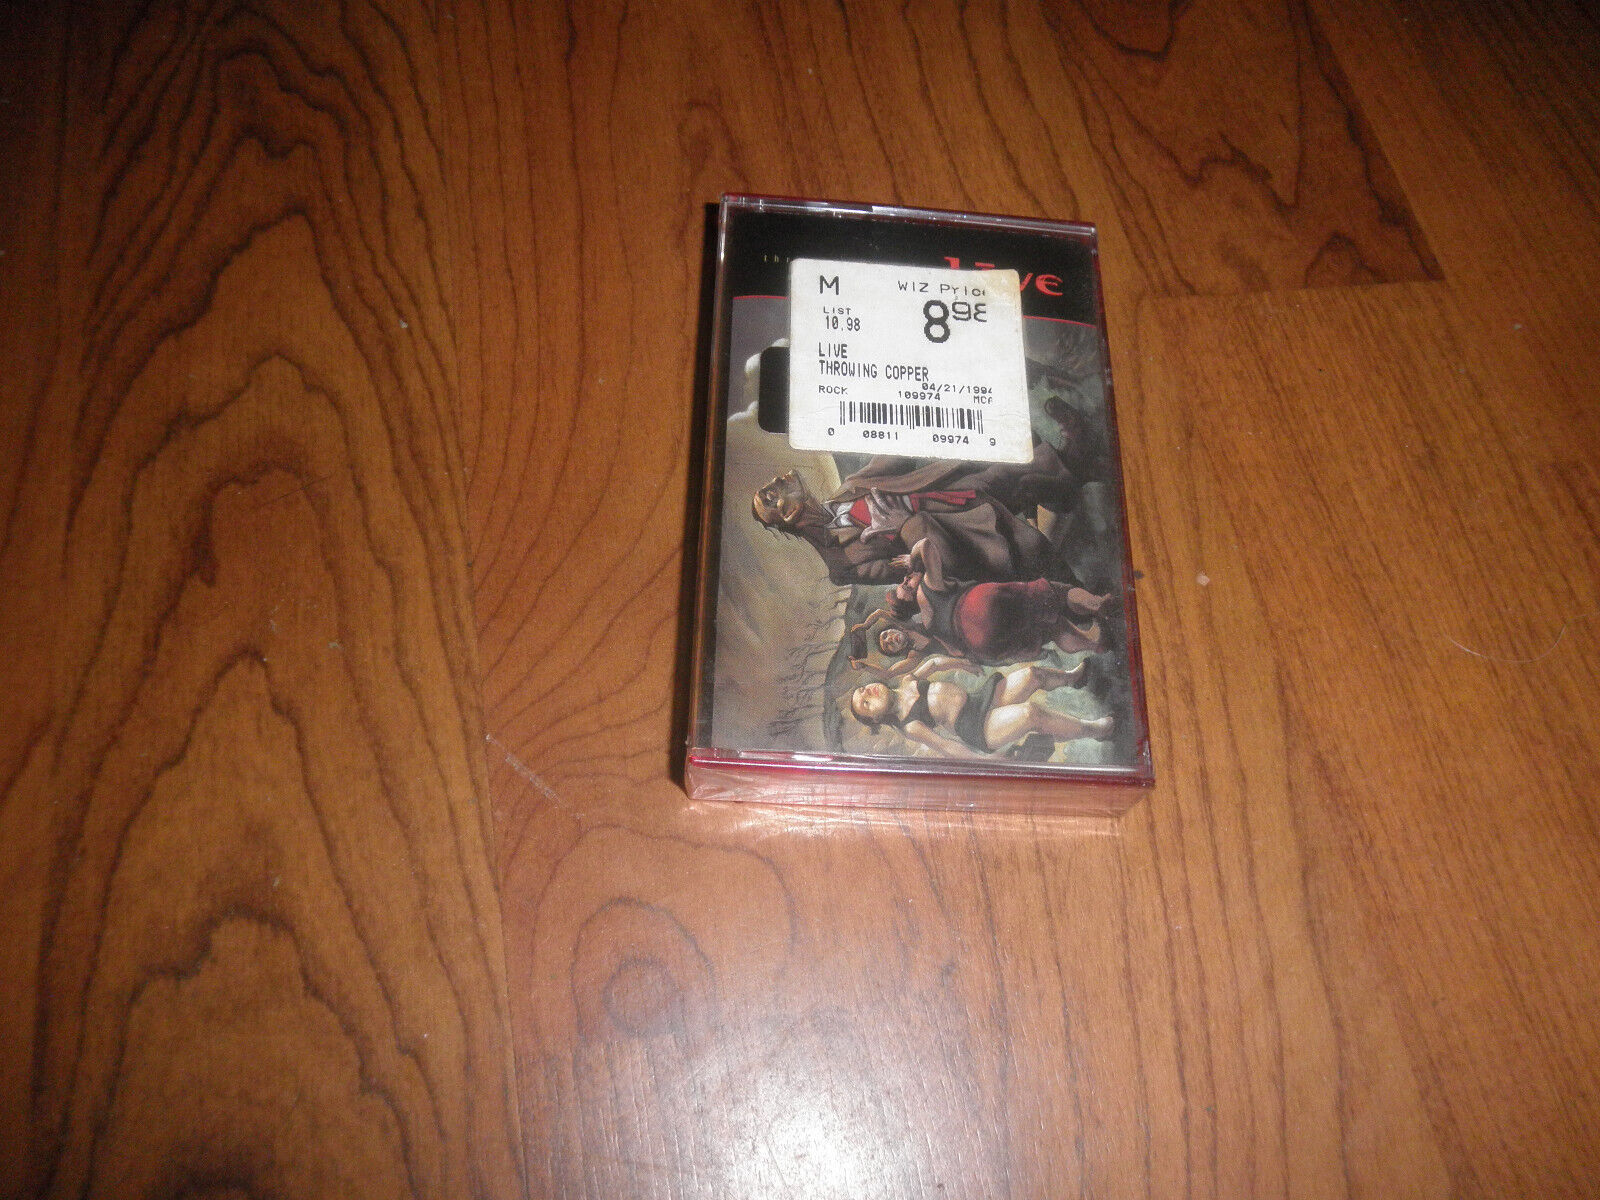 THROWING COPPER BY LIVE - SEALED CASSETTE_  RARE-1994